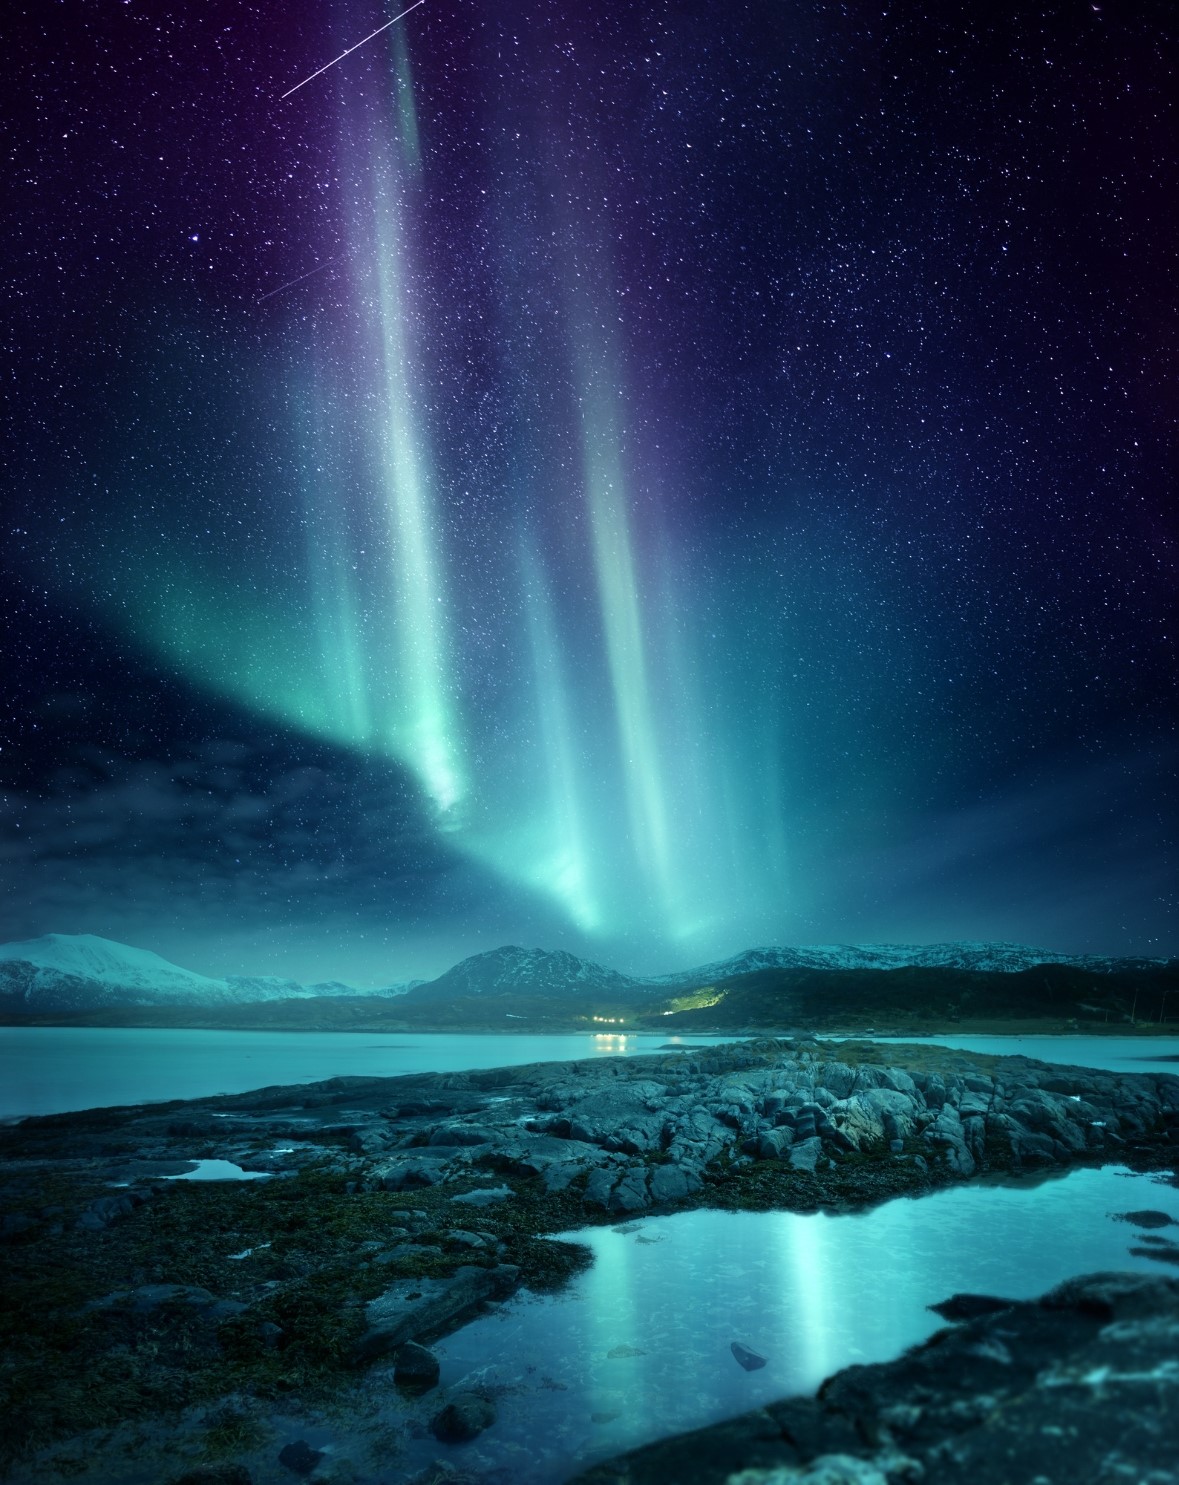 The northern lights at night above a lake